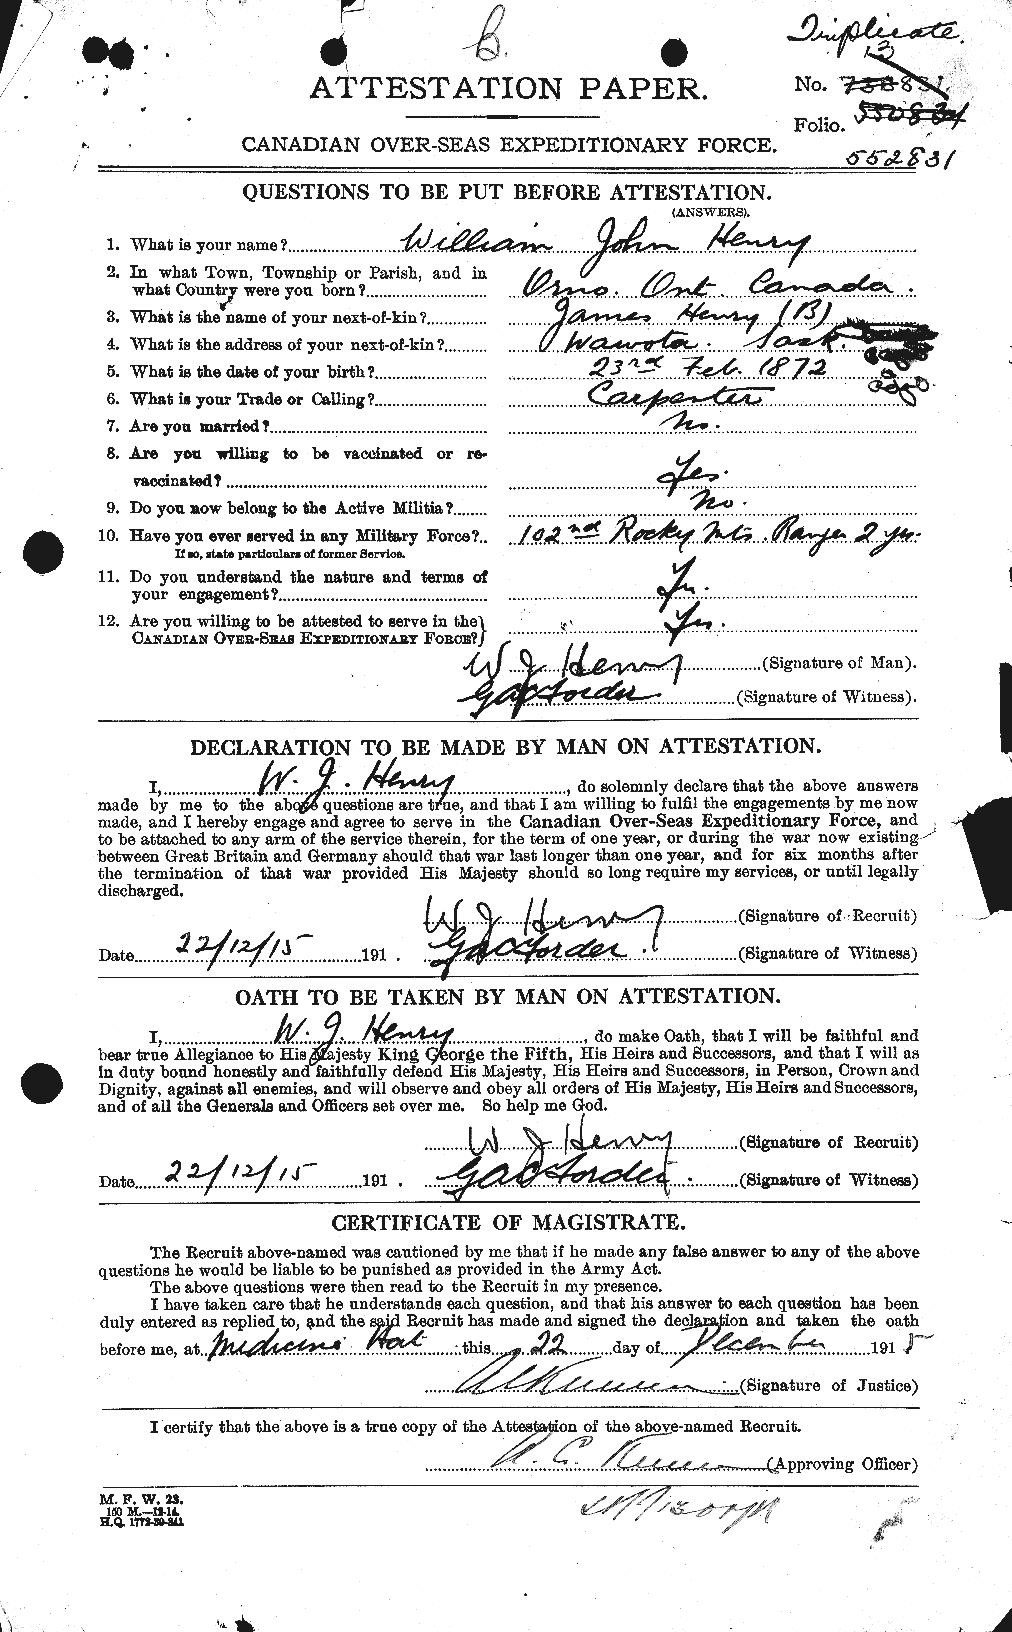 Personnel Records of the First World War - CEF 387787a